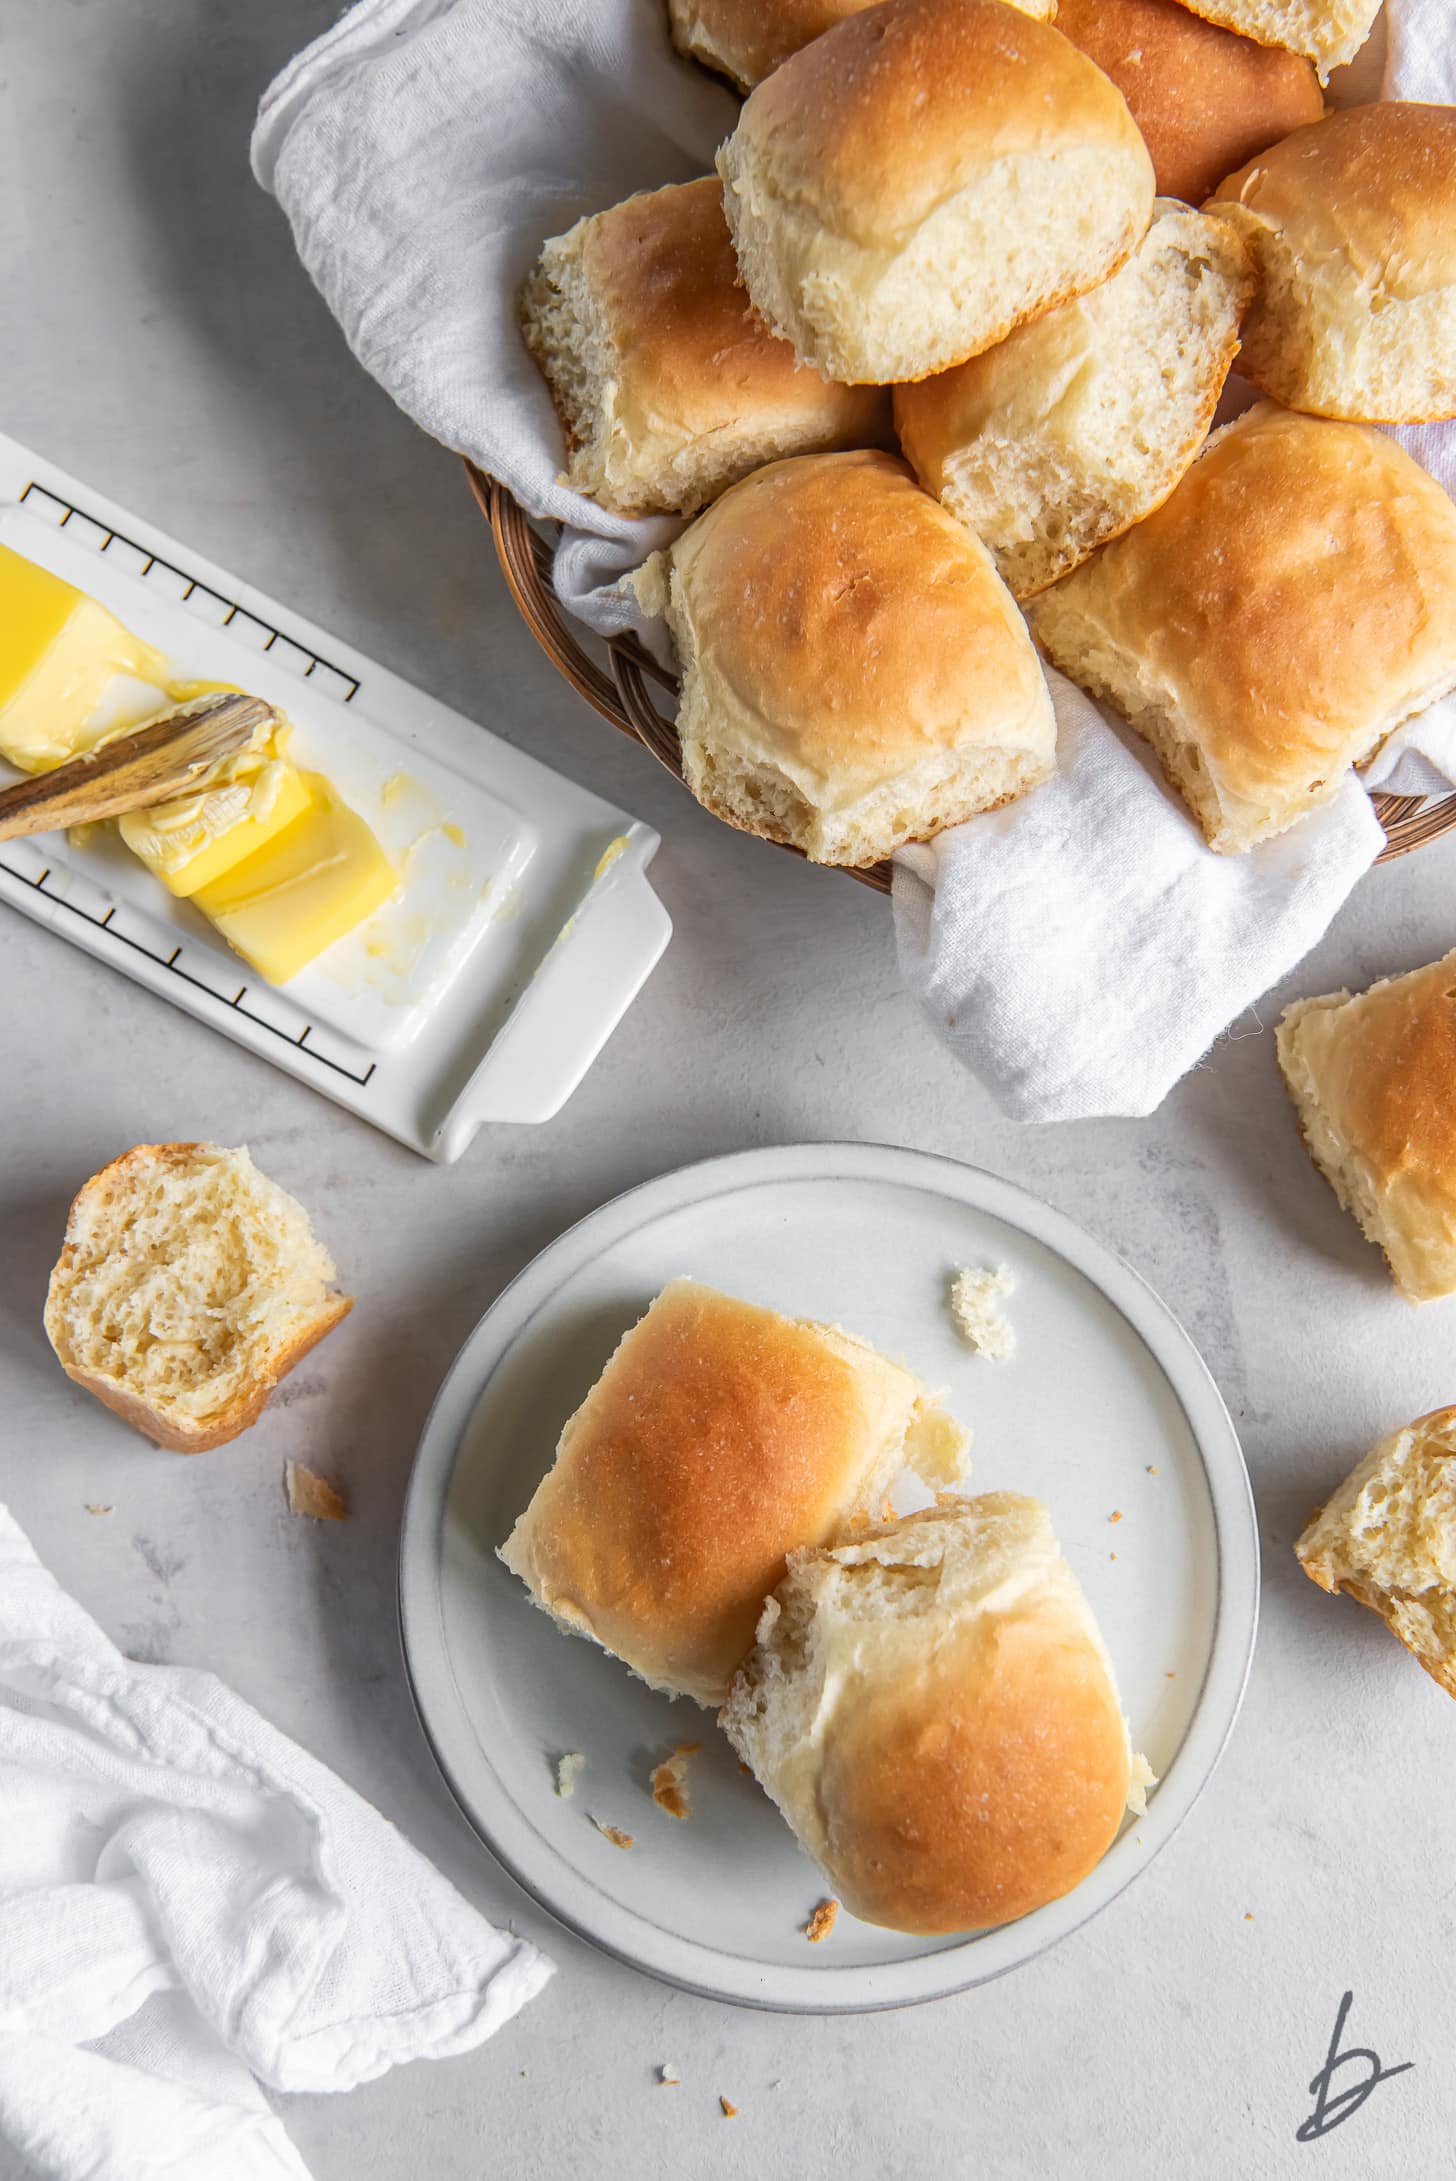 two homemade dinner rolls on a plate next to basket of rolls and butter stick